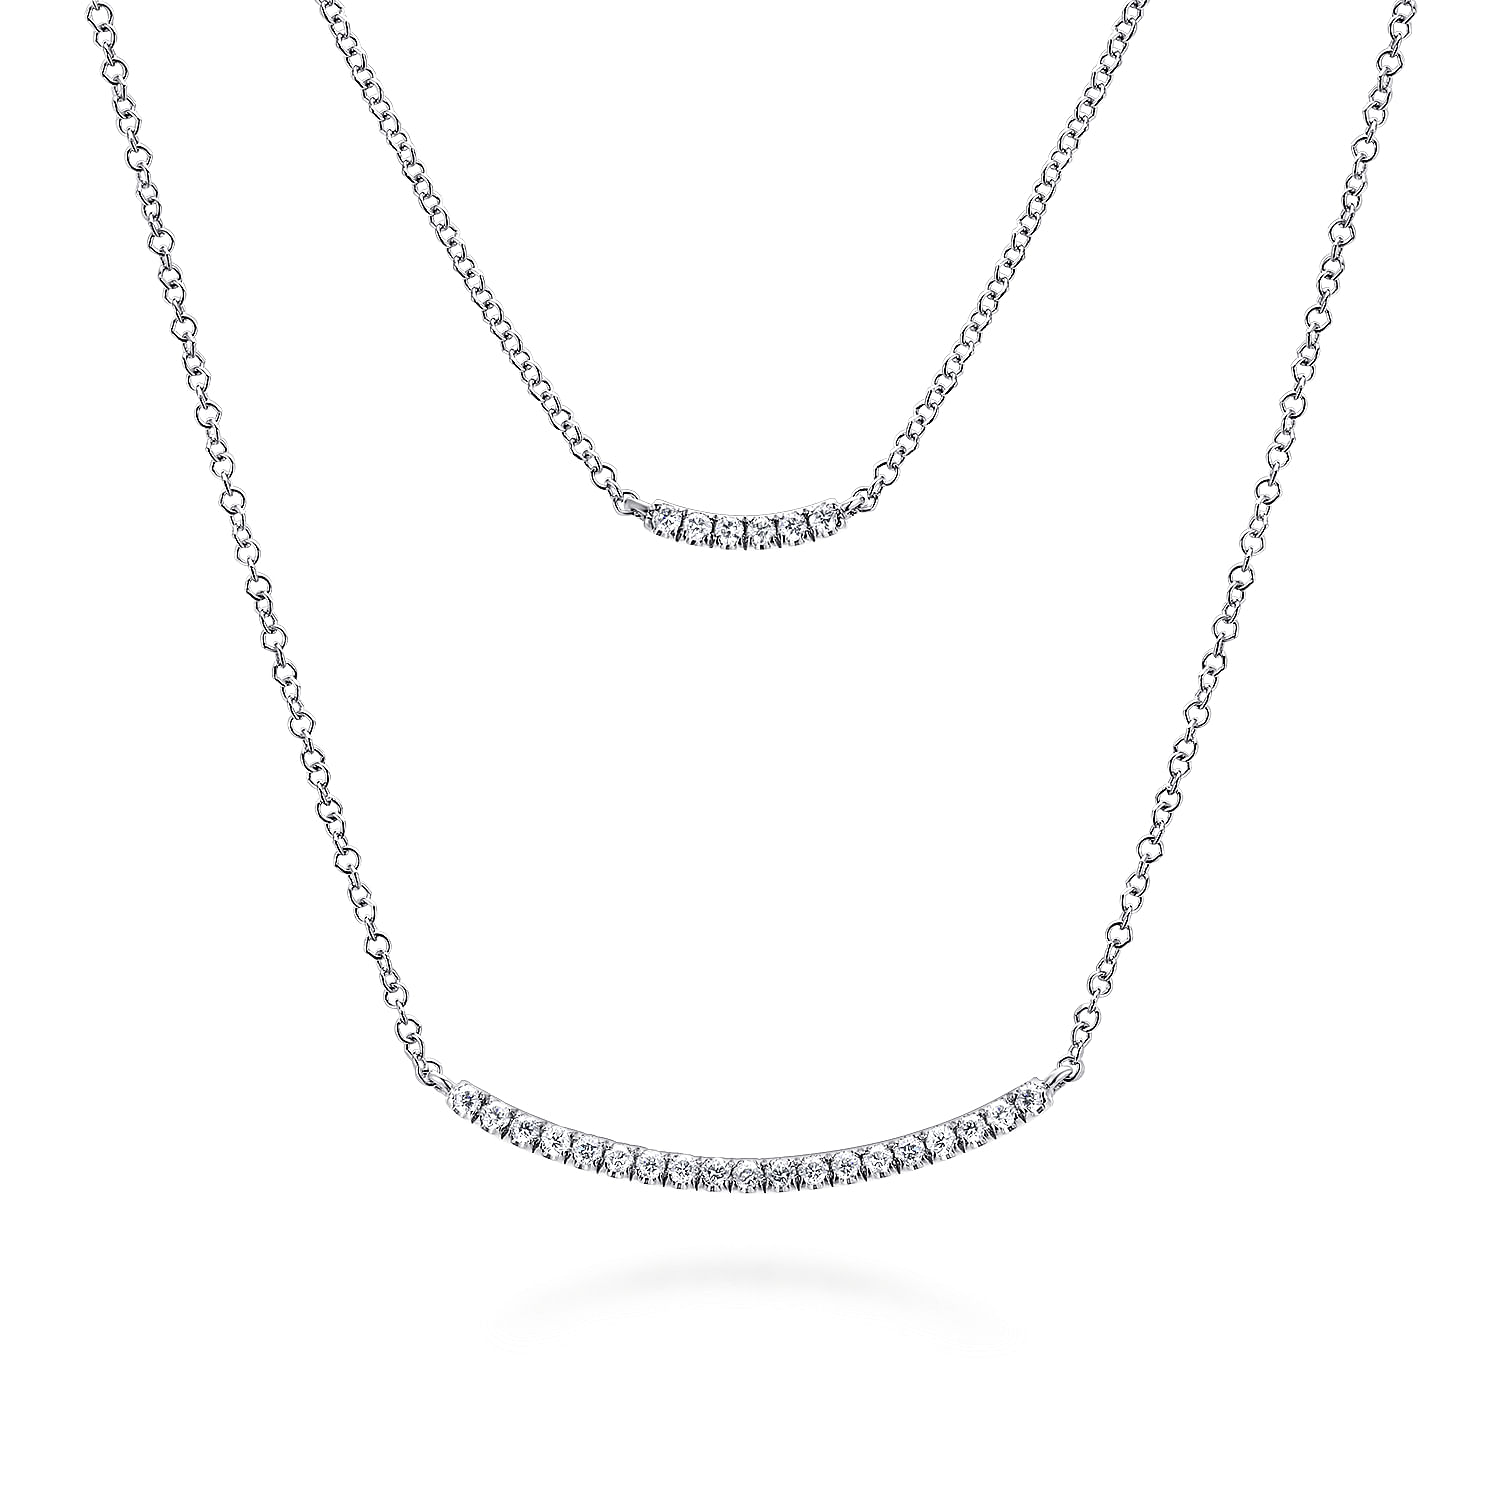 Two Strand 14K White Gold Curved Diamond Bar Necklace